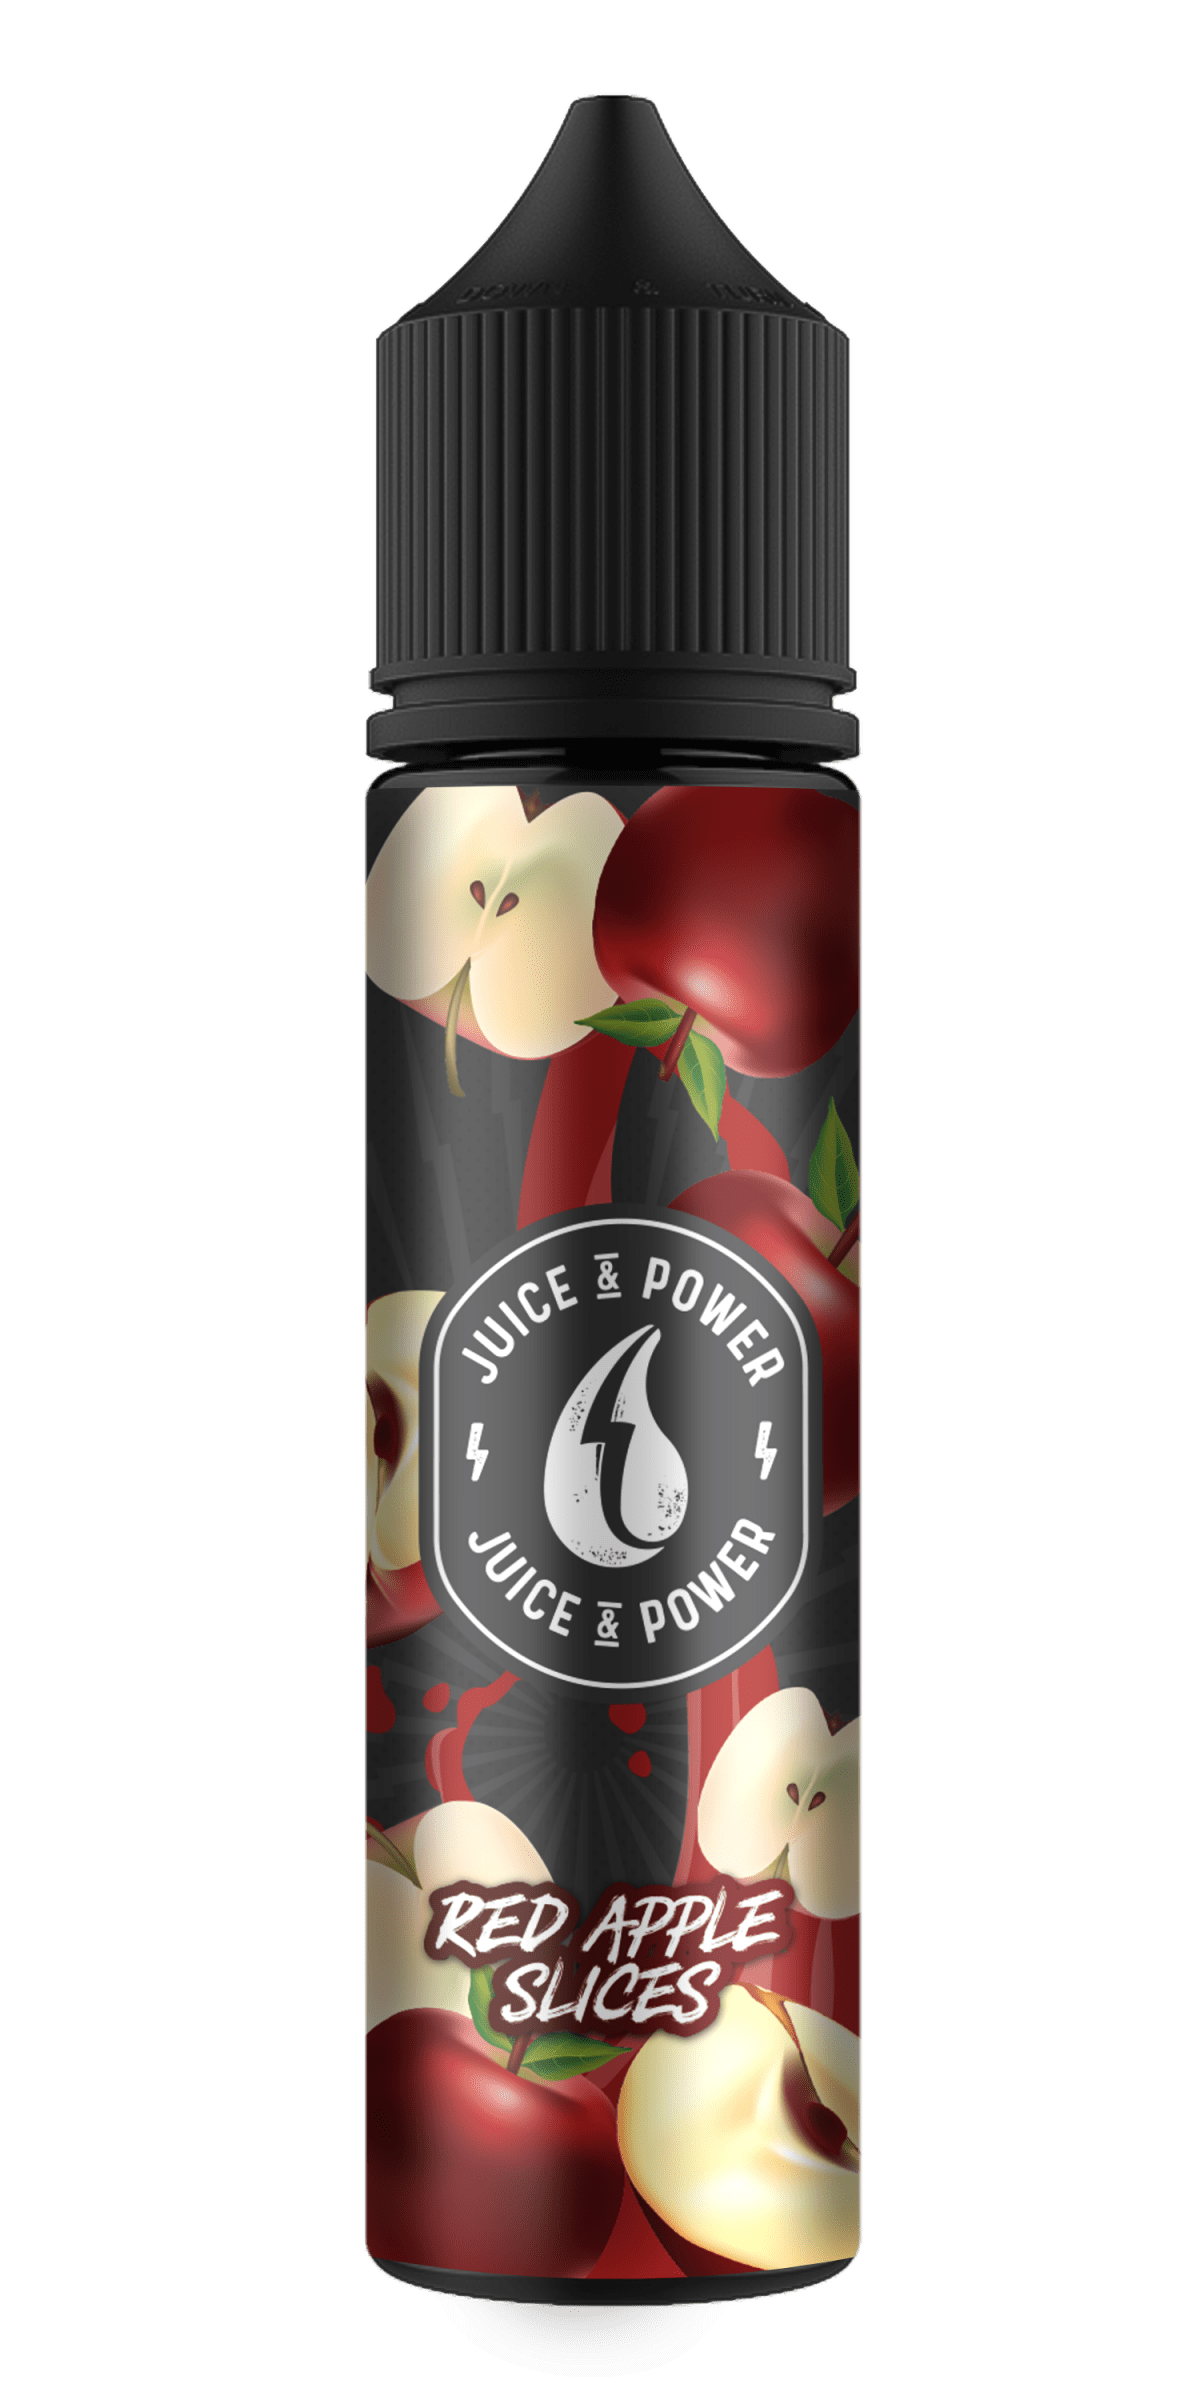 RED APPLE SLICES E LIQUID BY JUICE 'N' POWER 50ML 70VG - Eliquids Outlet